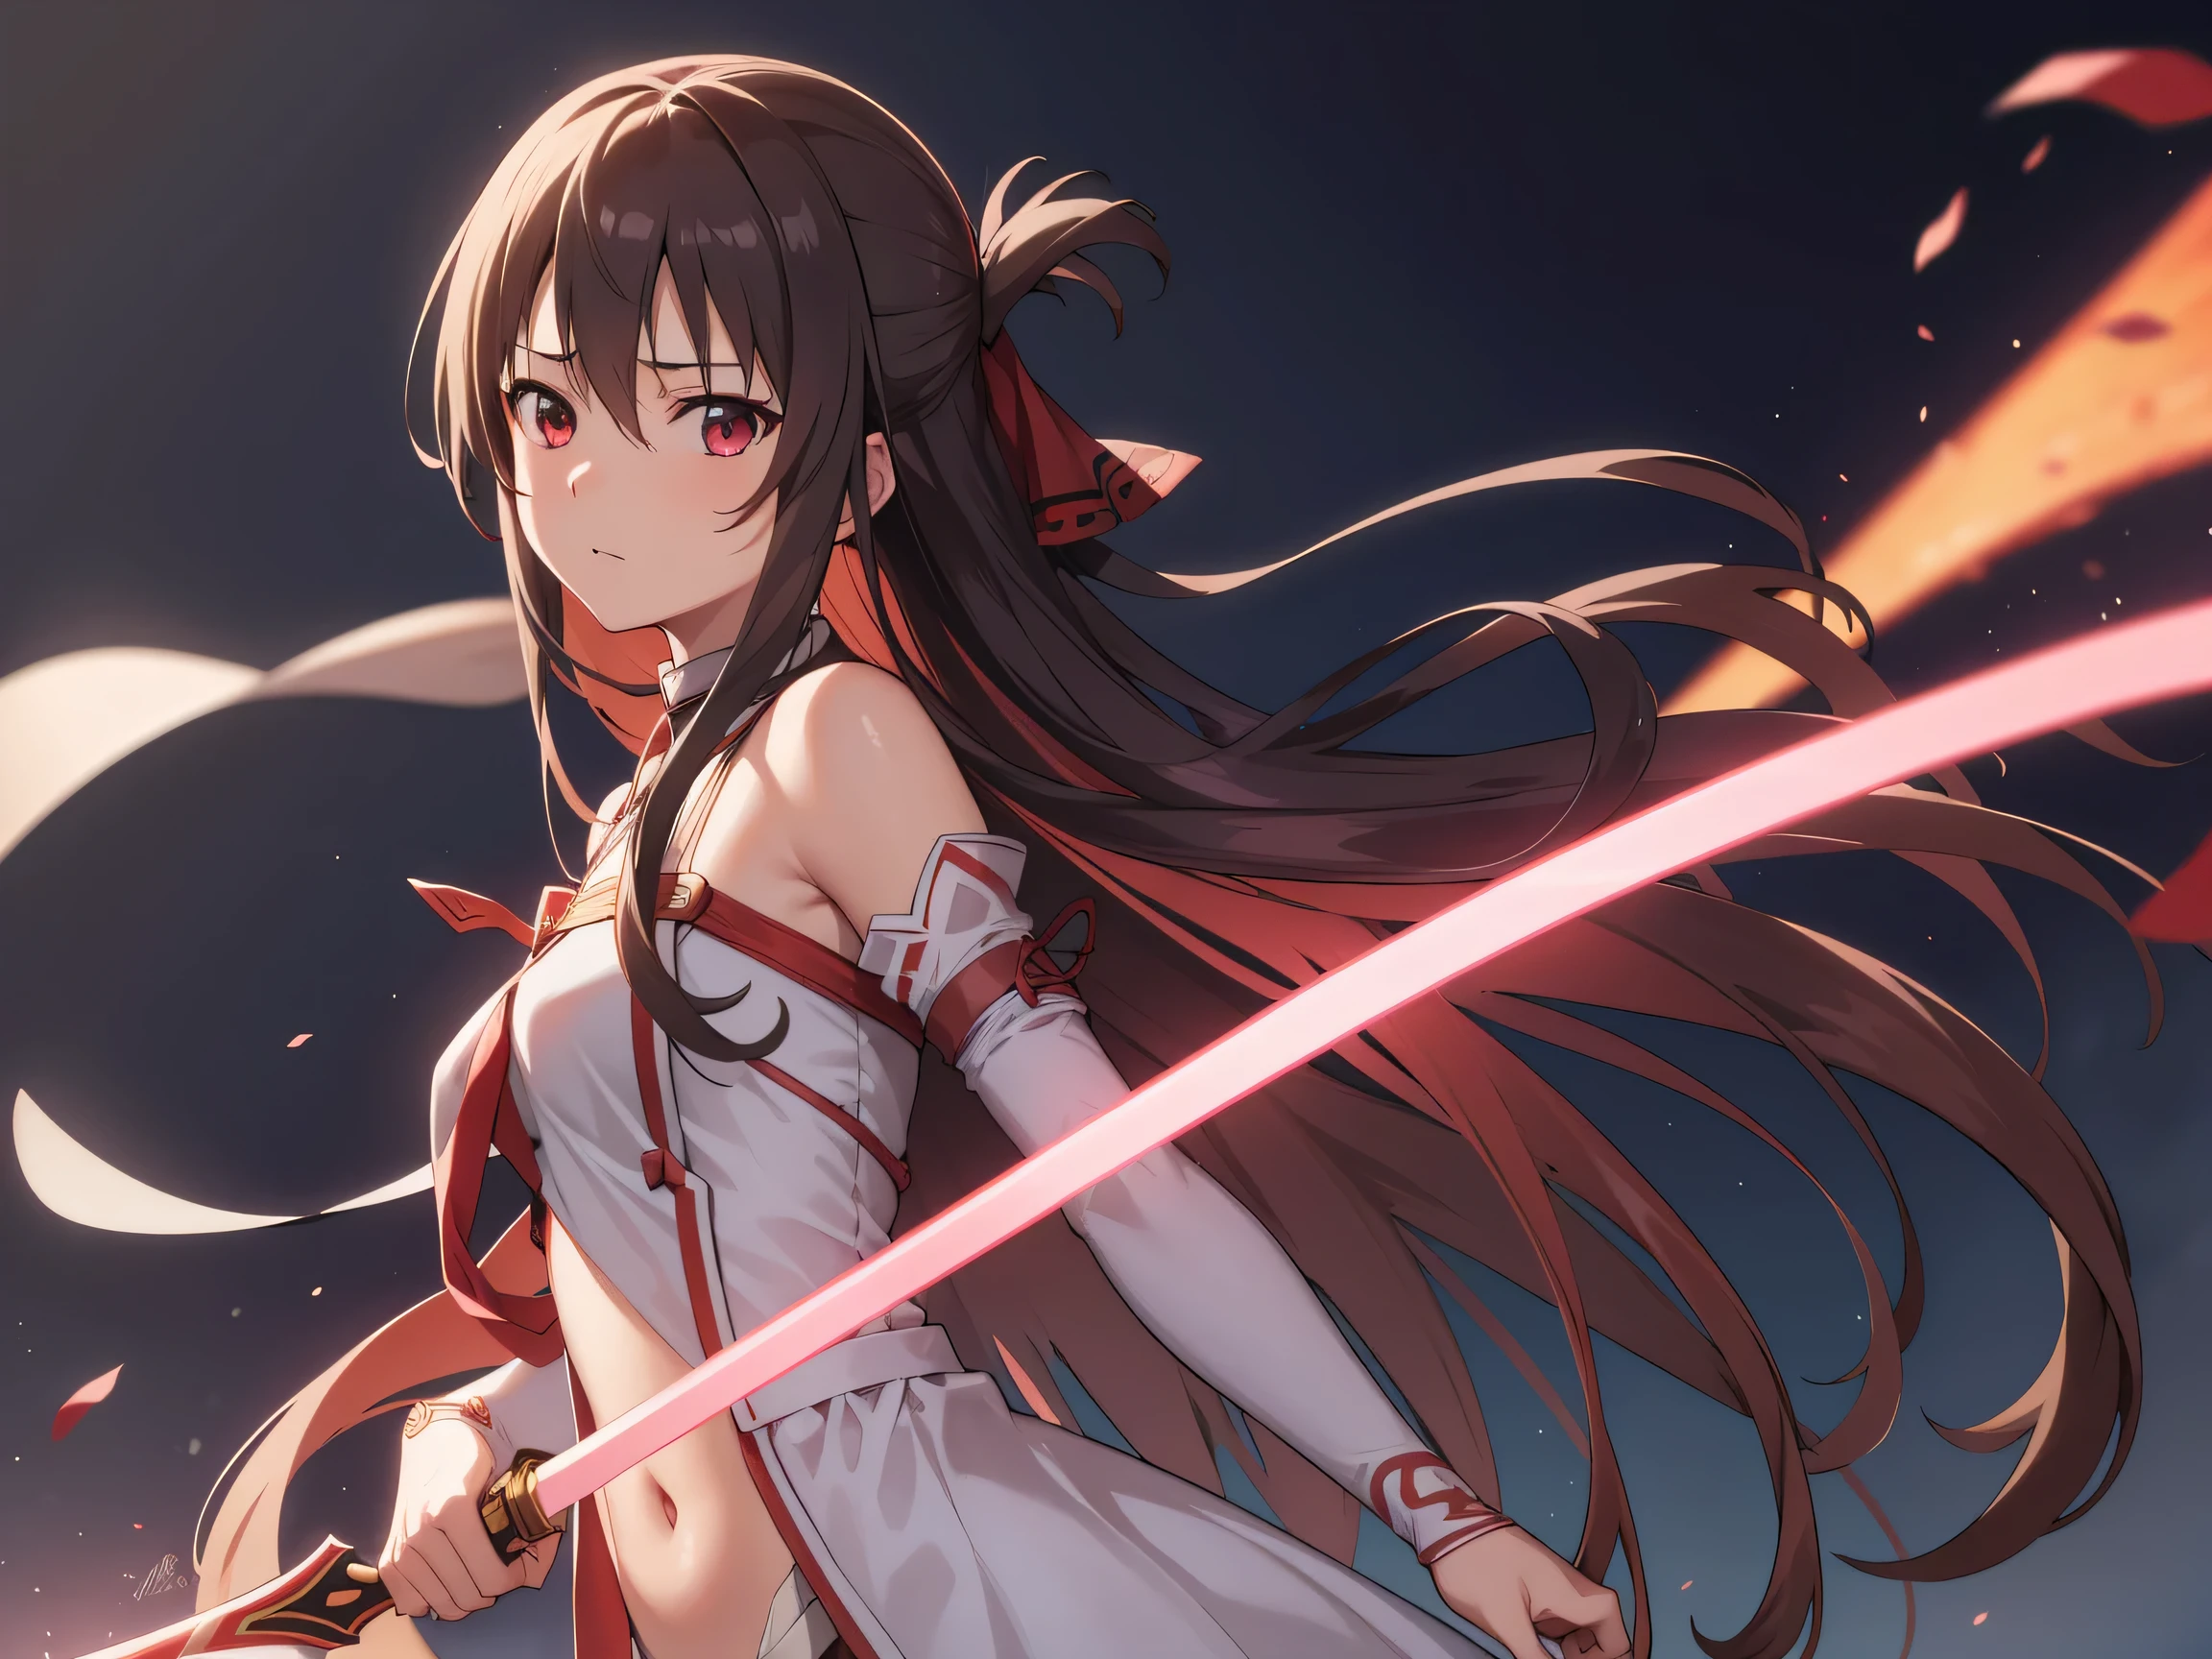 asunayuuki,asuna yuuki,amount,Side Lock,Classrooms of the highest quality, High resolution, unite 8k wallpaper,(figure:0.8), (Beautiful fine details:1.6), Highly detailed face, Perfect lighting, Highly detailed CG, (Perfect hands, Perfect Anatomy), whole body,SAO,Sword Art Online,Sword Art Online,Sword Art Online,SwordArtOnline,Yuuki Asuna,Asuna,Naughty,semen,Pussy,Dick,Sex,penis,Male genital,genital,Creampie